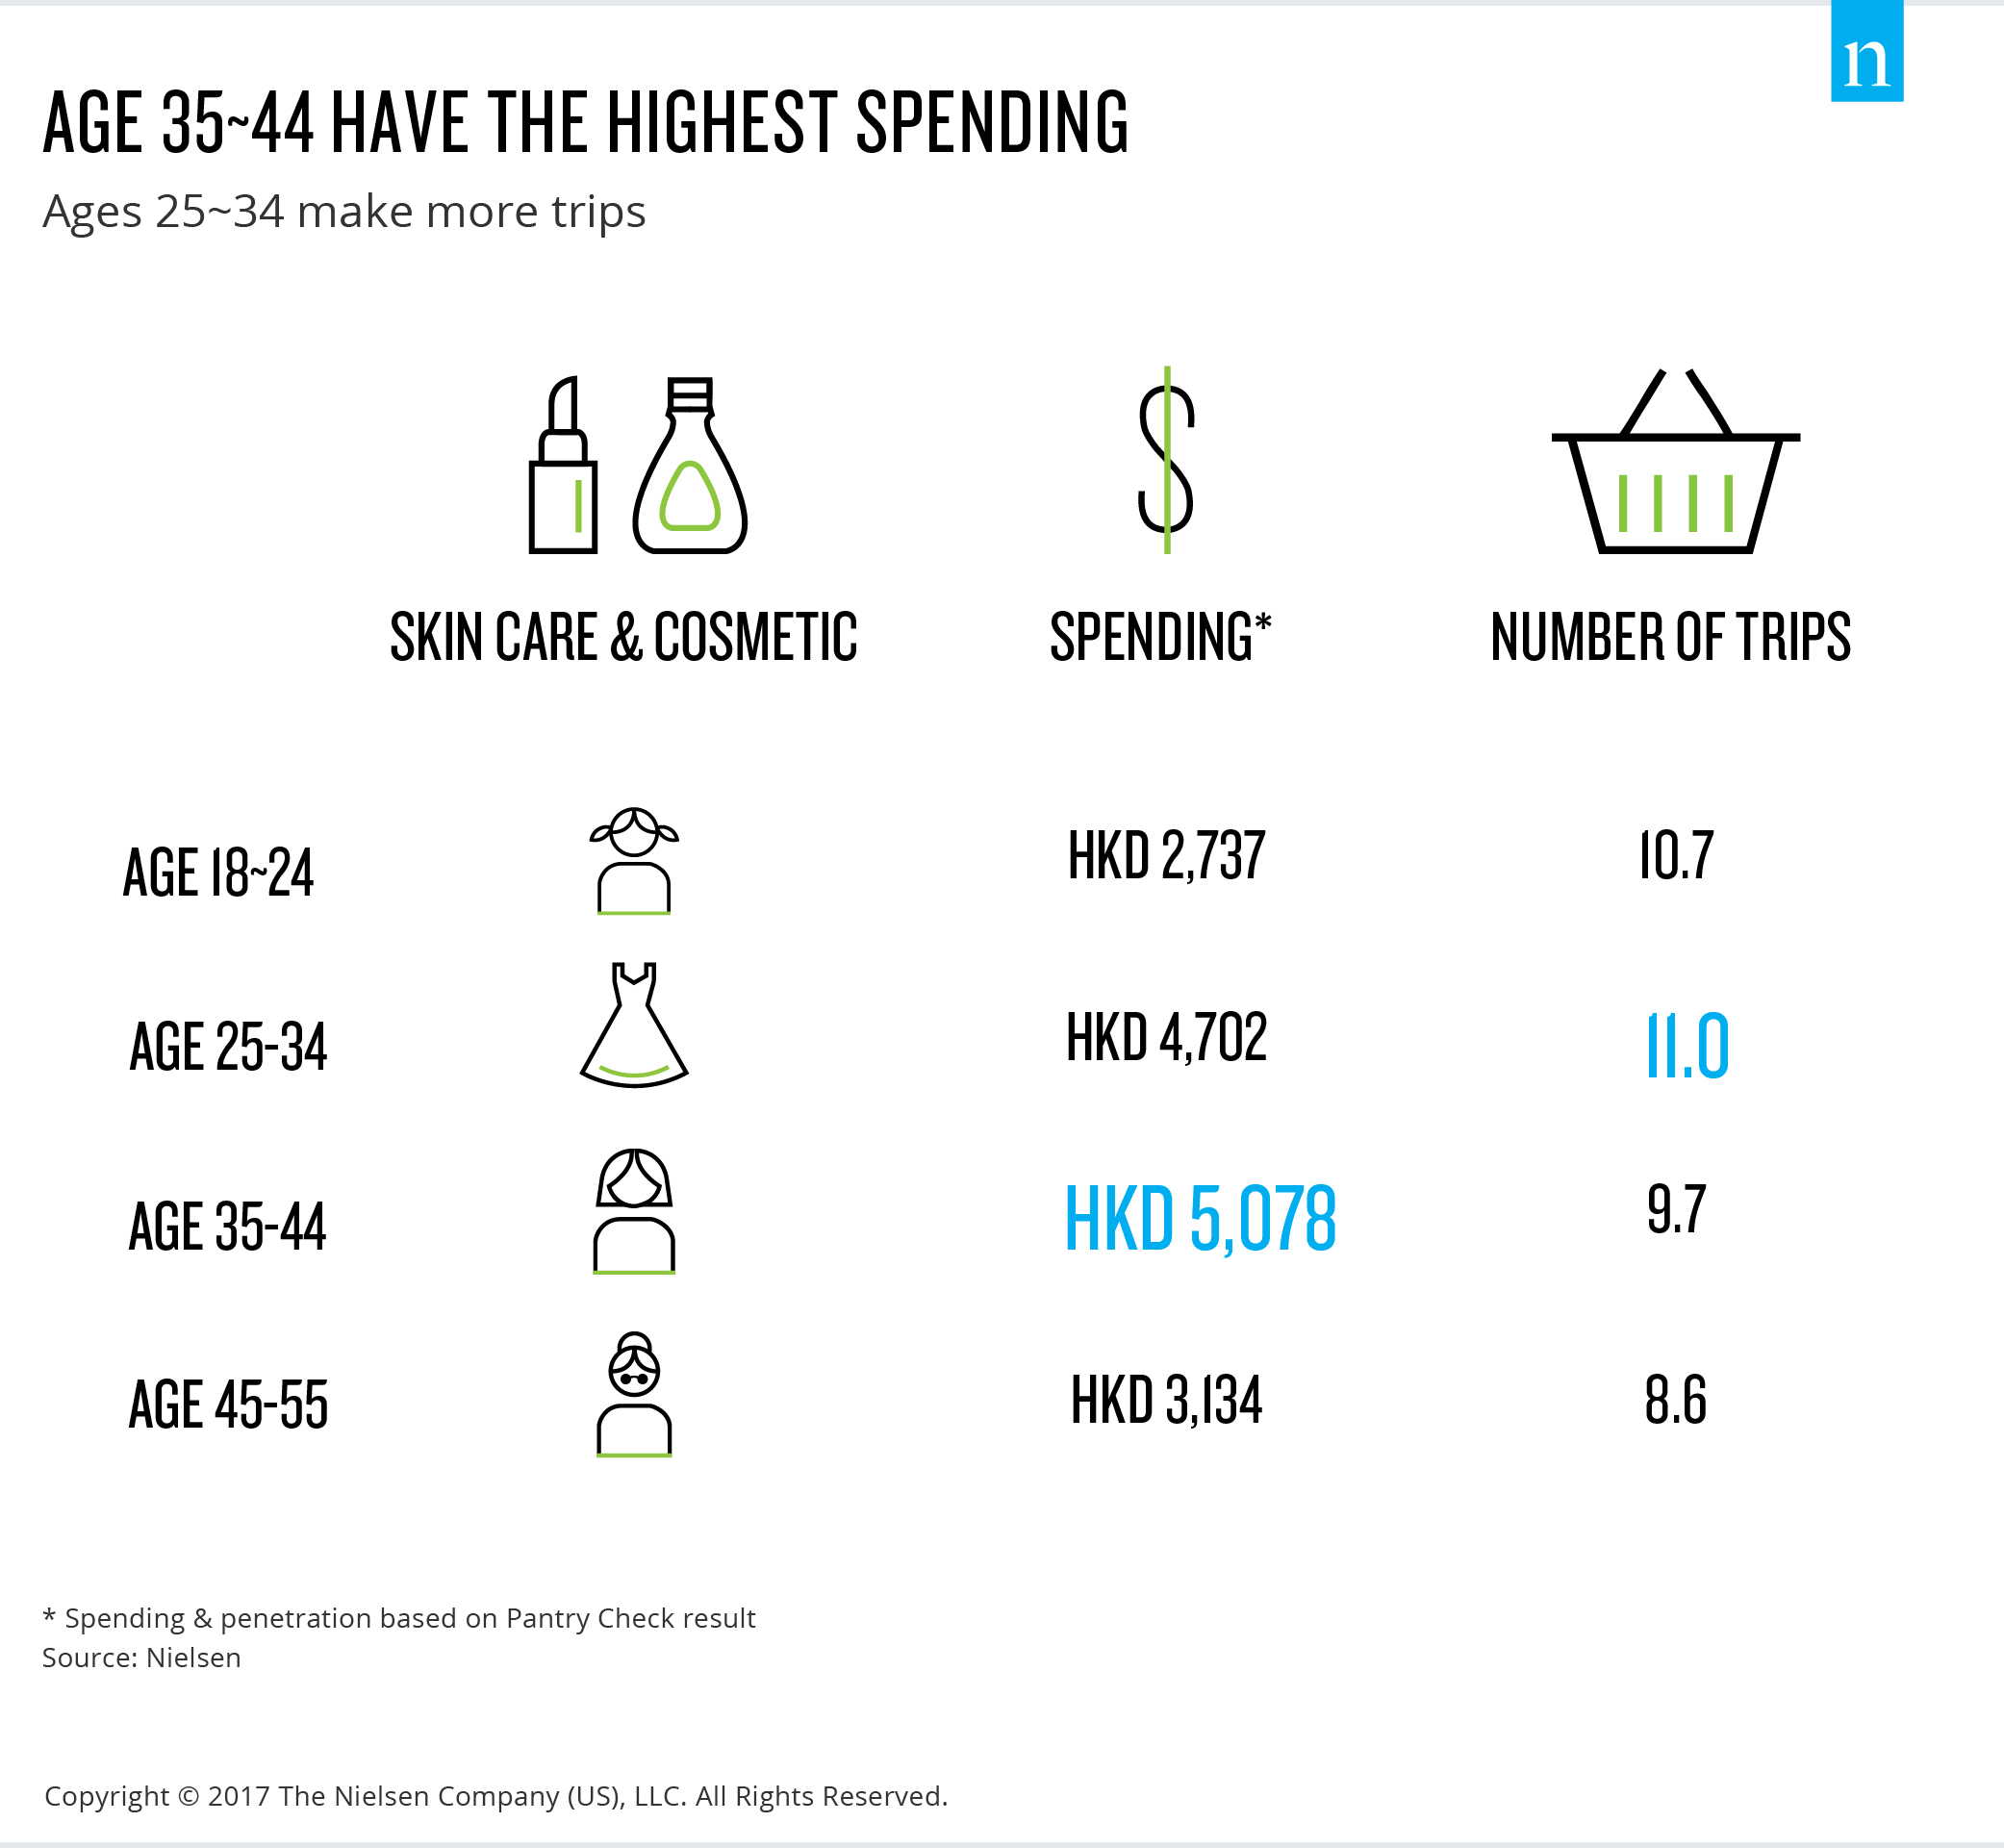 Hong Kong female consumers spend over HK$4,000 on skincare and cosmetic ...